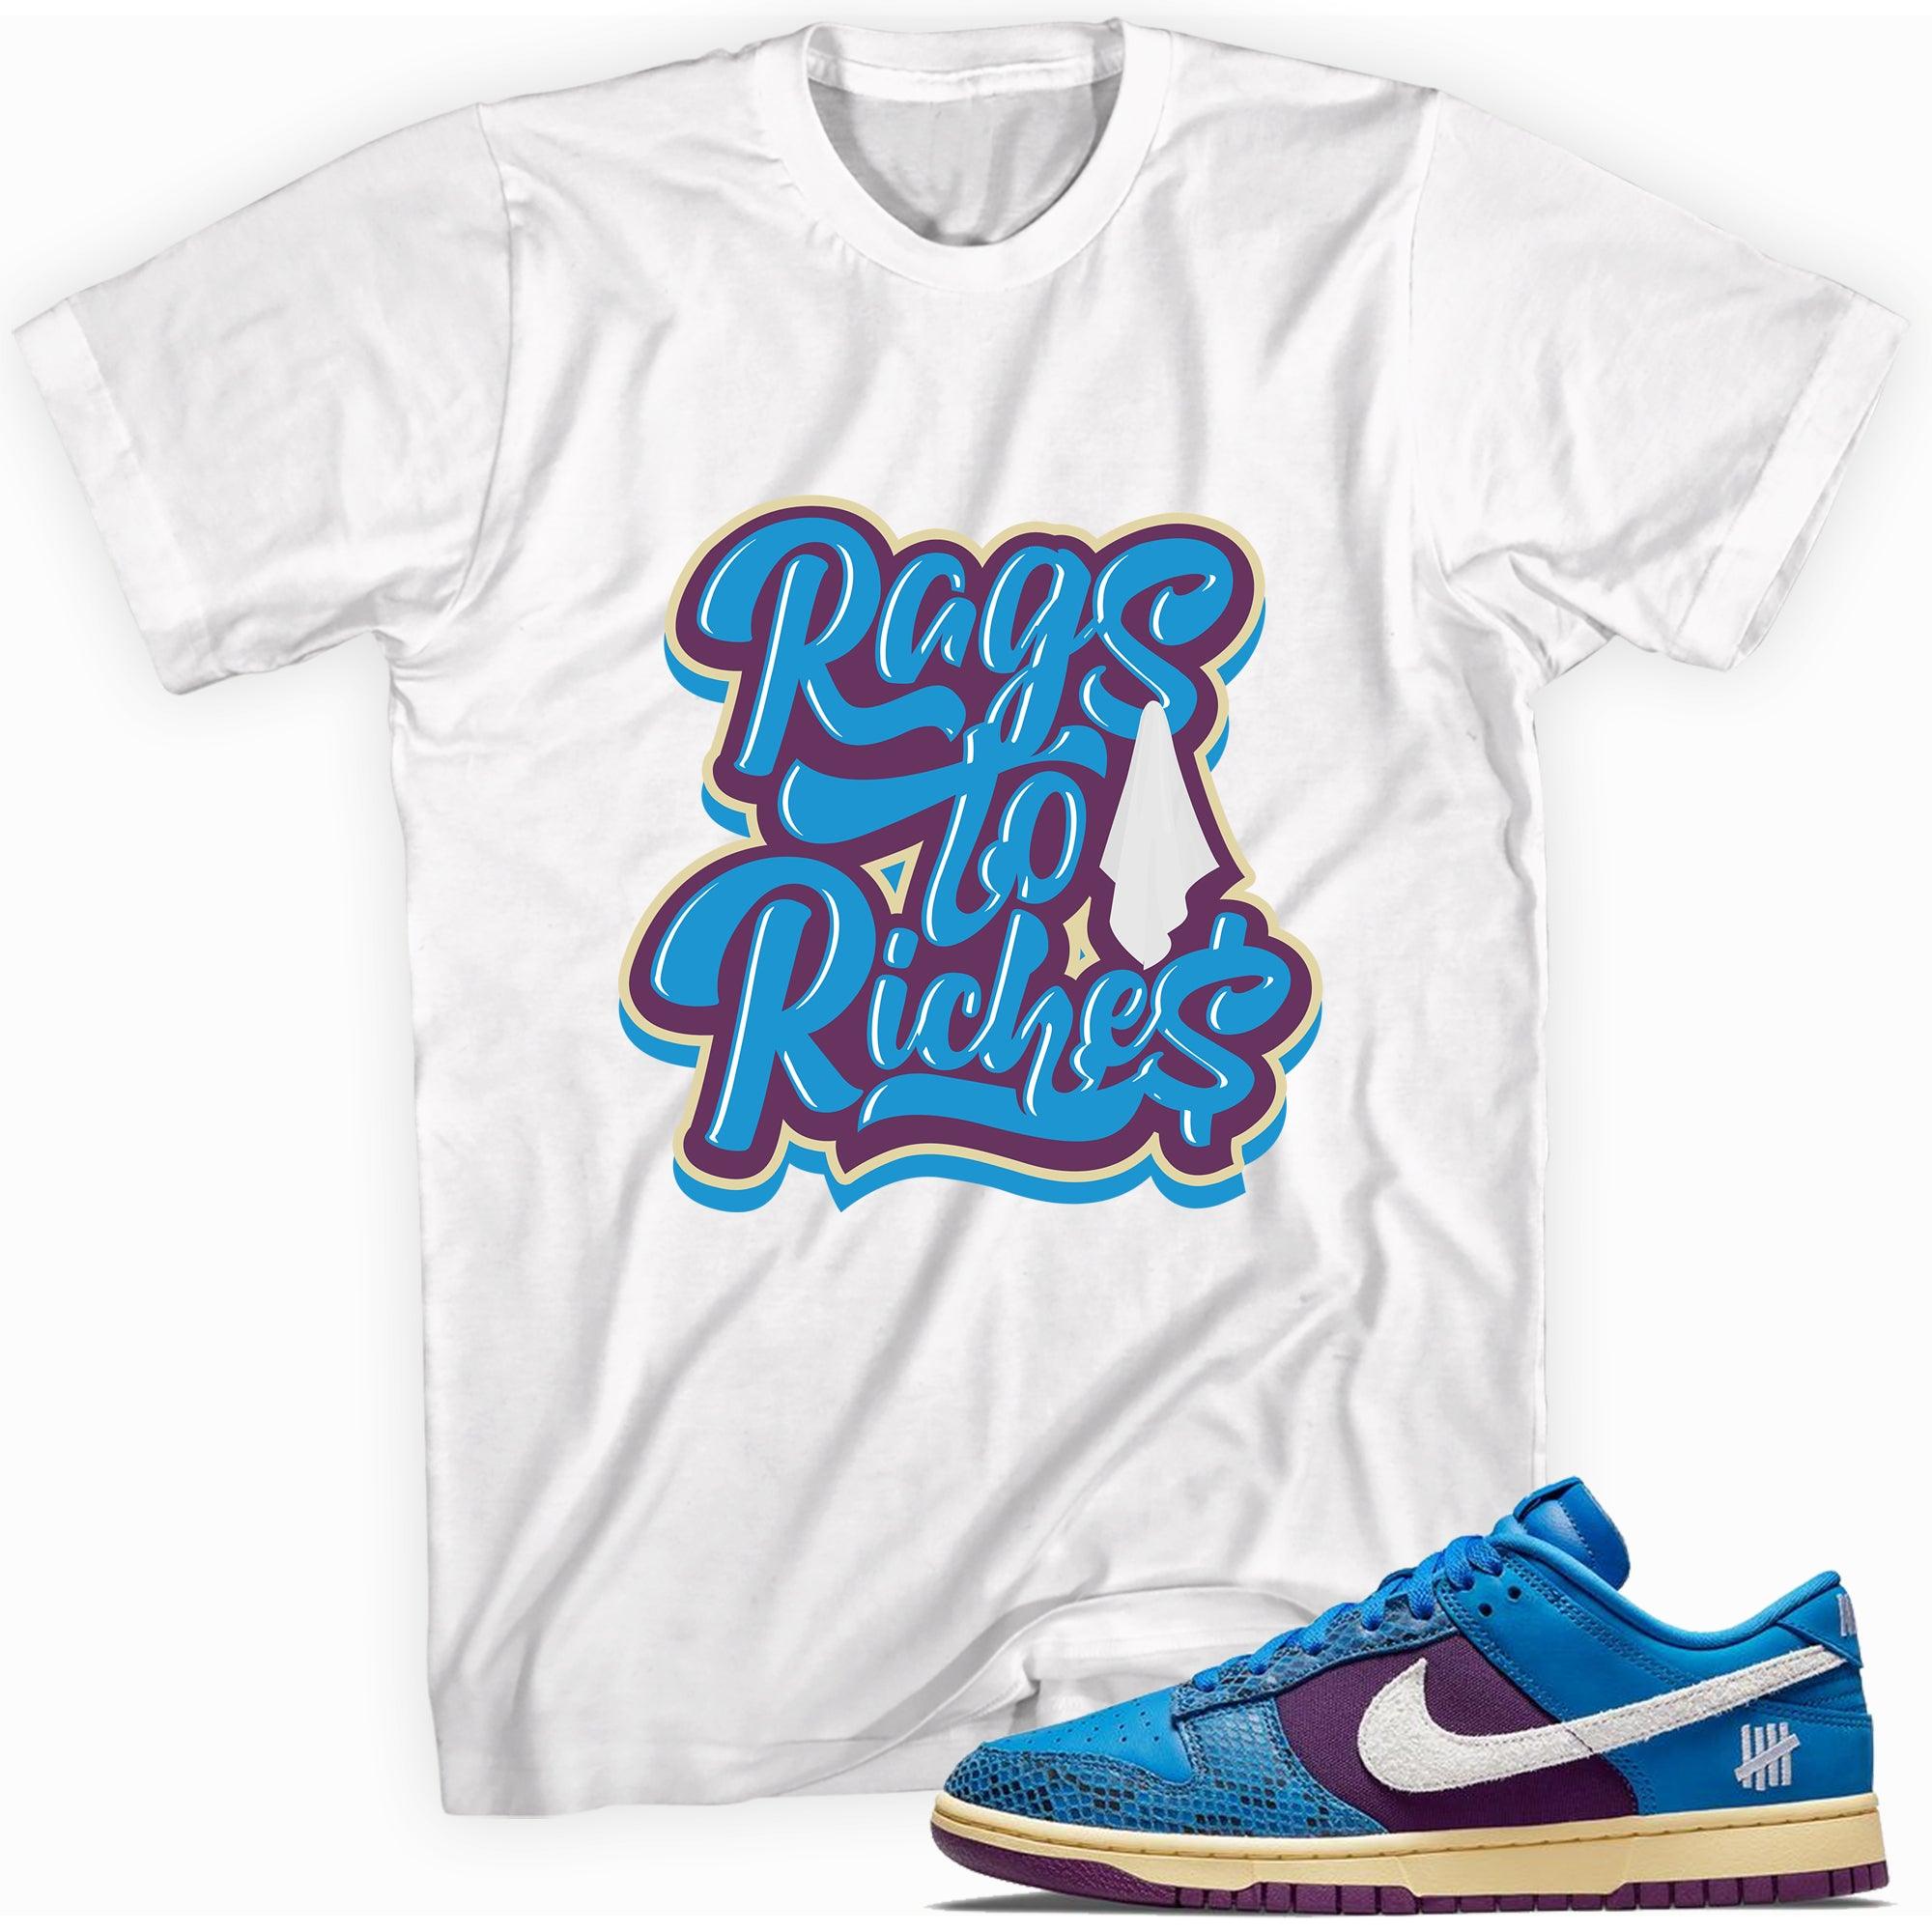 Rags To Riches Shirt Nike Dunk Low Undefeated 5 On It Dunk vs AF1 Sneakers photo